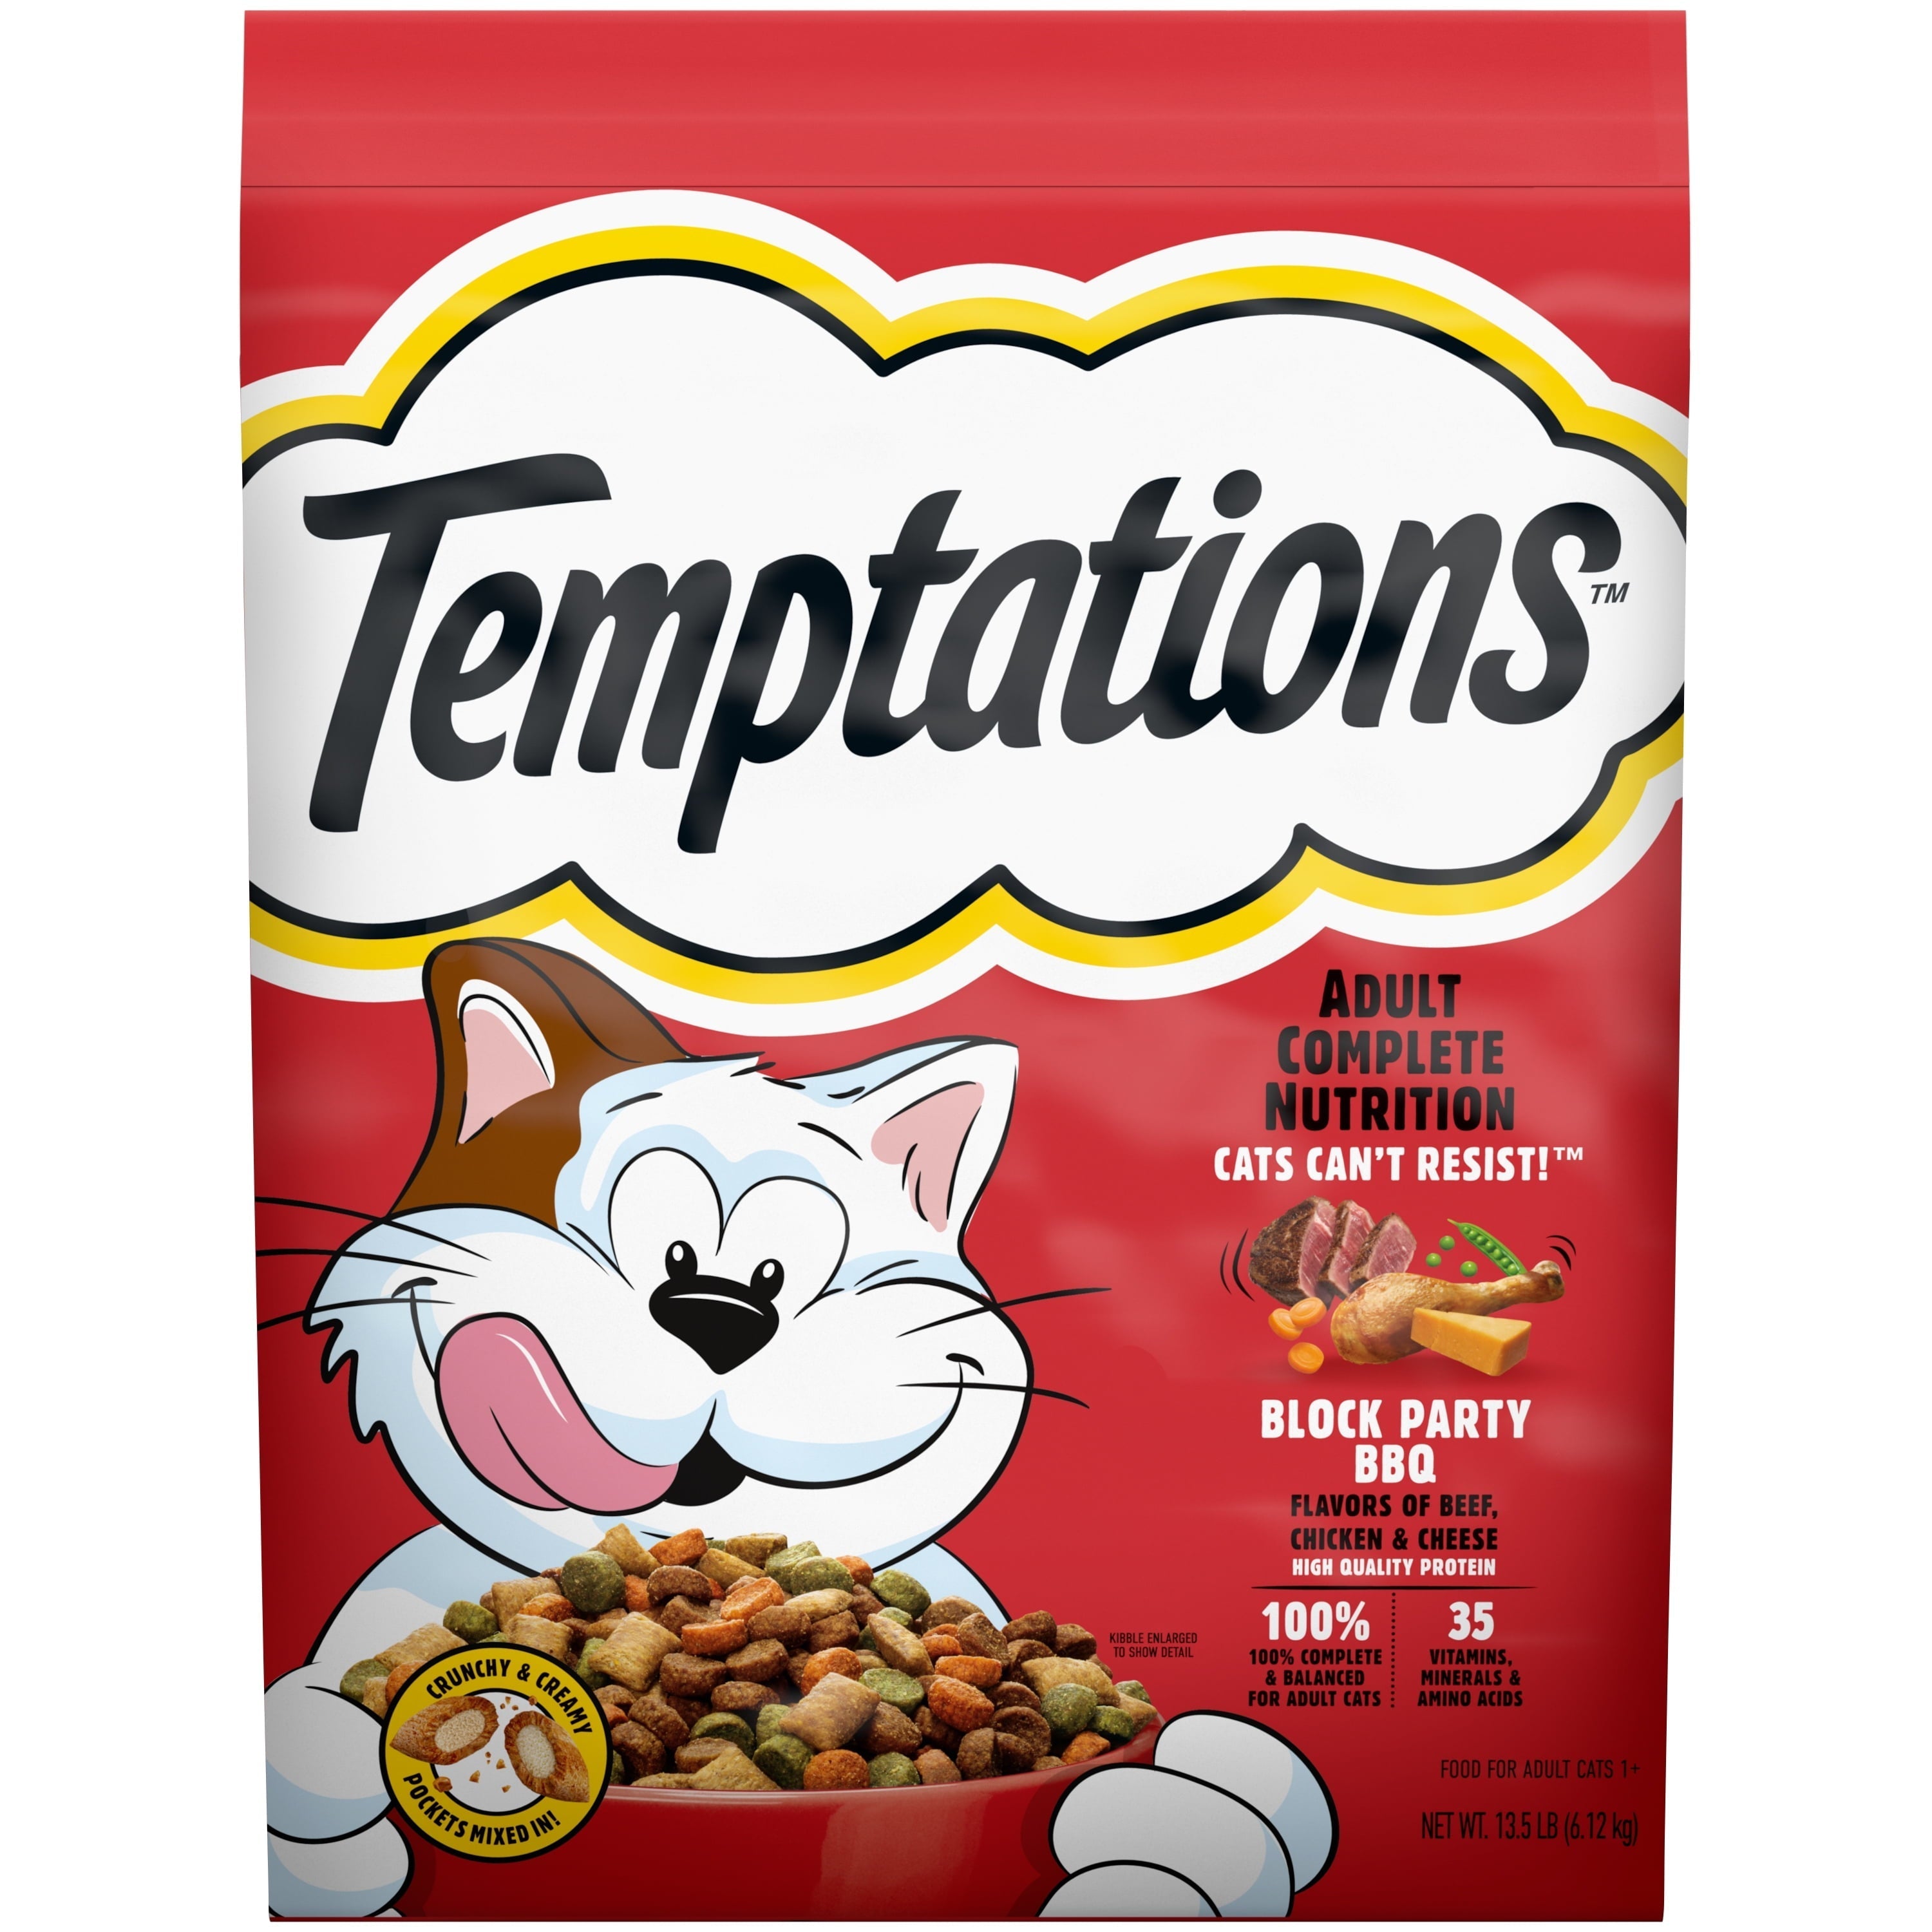 Wholesale prices with free shipping all over United States TEMPTATIONS Block Party BBQ Flavor Adult Dry Cat Food, 13.5 lb. Bag Walmart Exclusive - Steven Deals